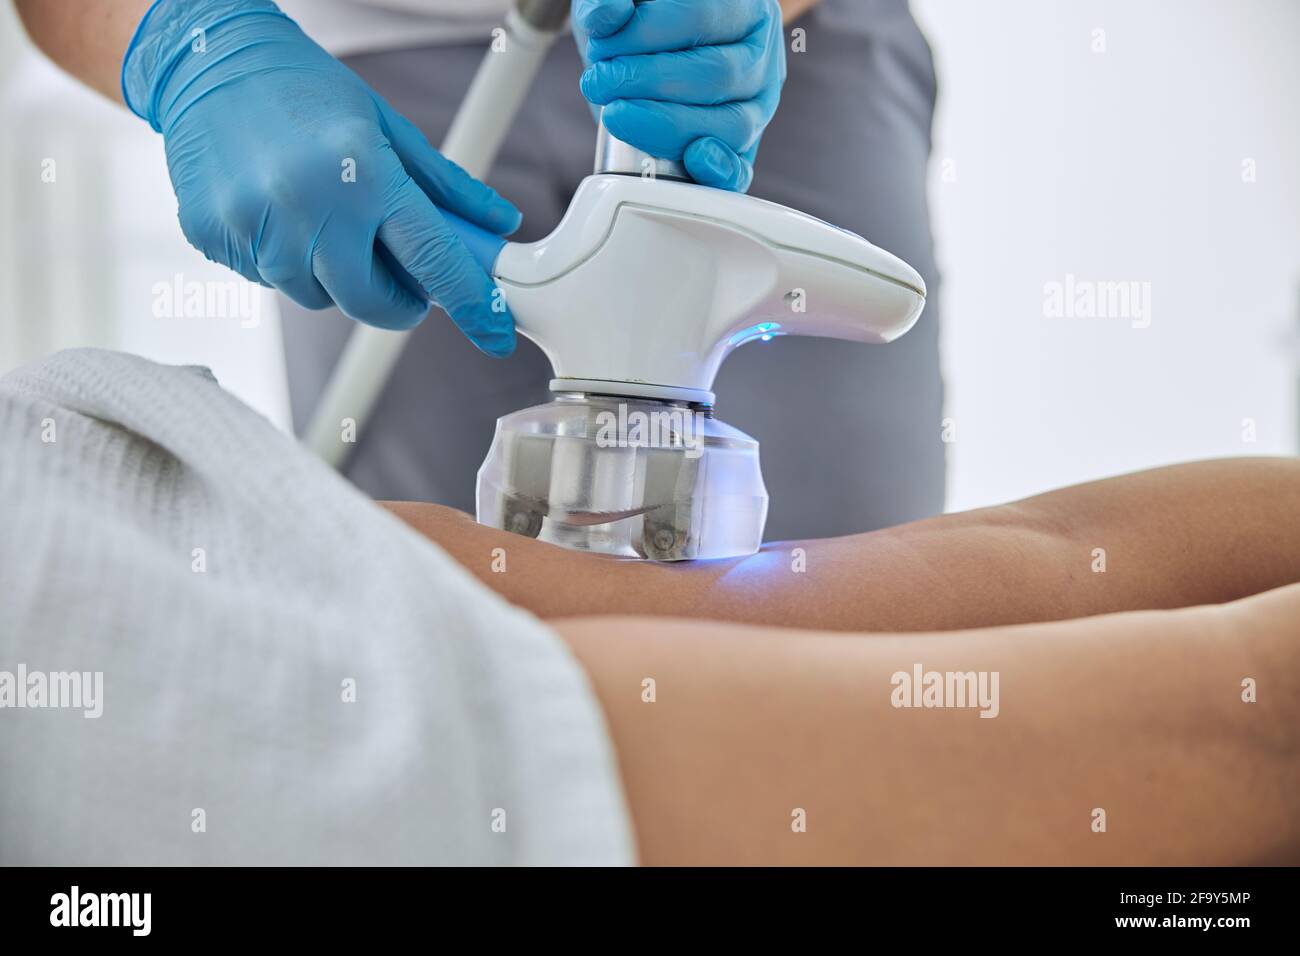 Unrecognized female client receiving anti-cellulite and anti-fat therapy in beauty clinic Stock Photo